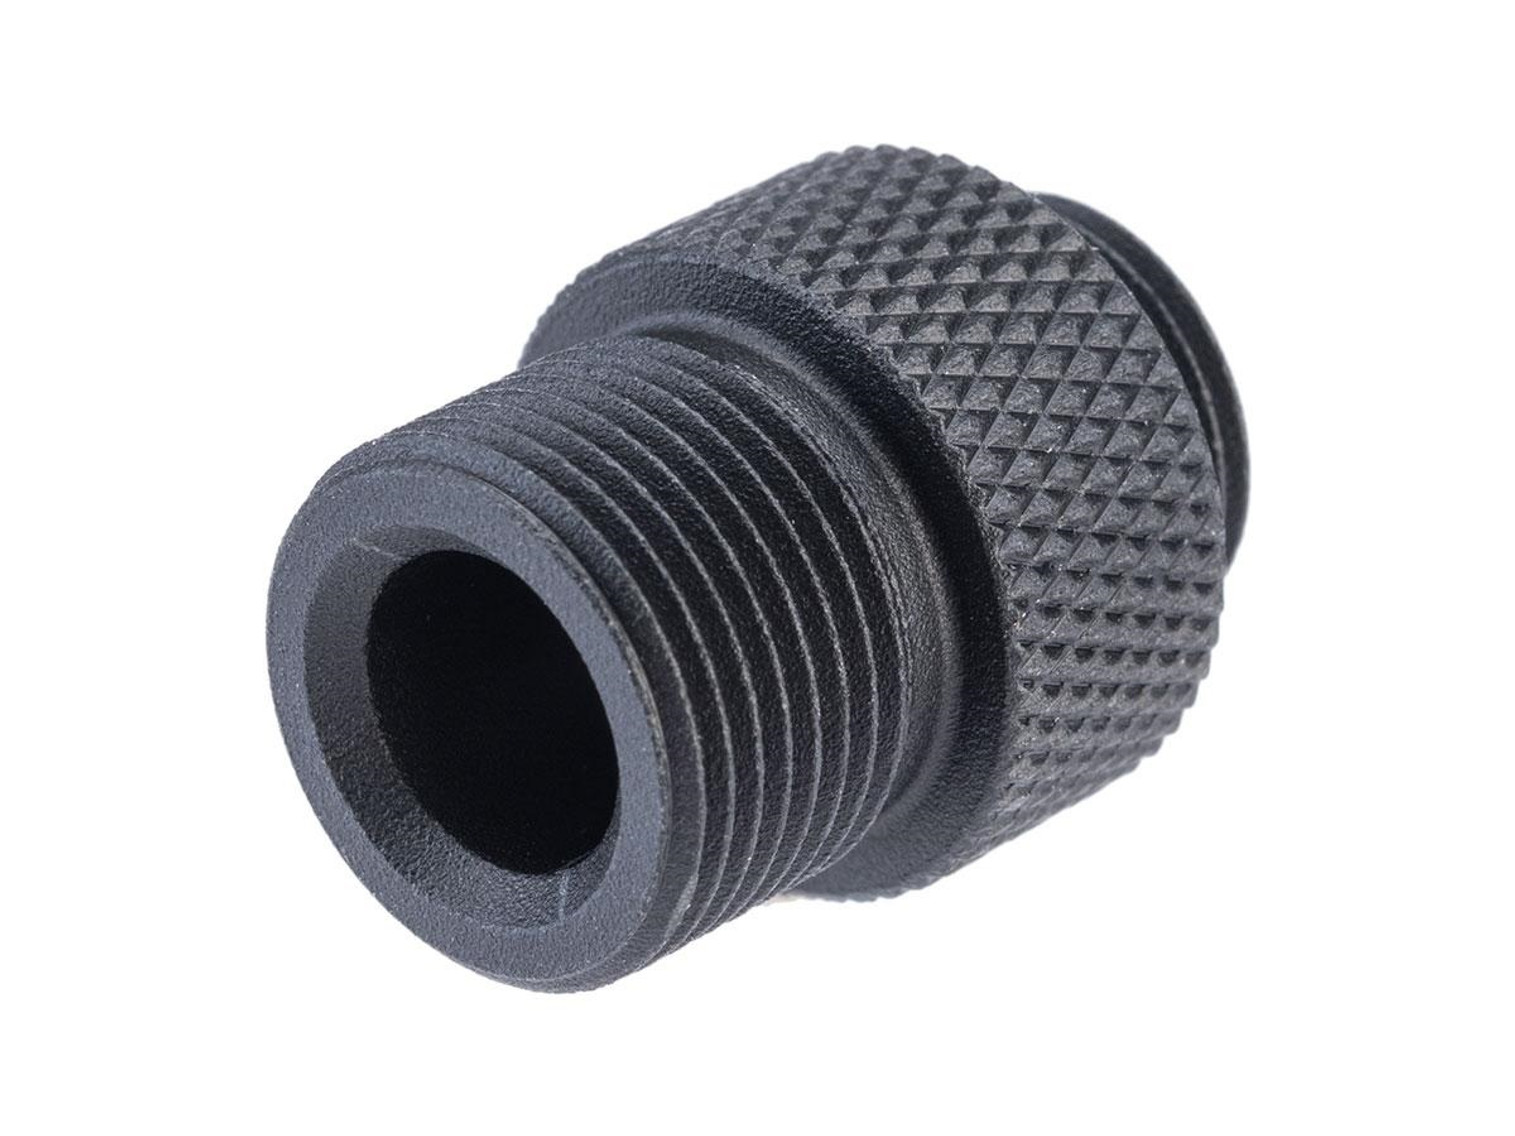 G&G 12mm to 14mm Negative Threaded Adapter for Airsoft GBB Pistol Outer Barrels